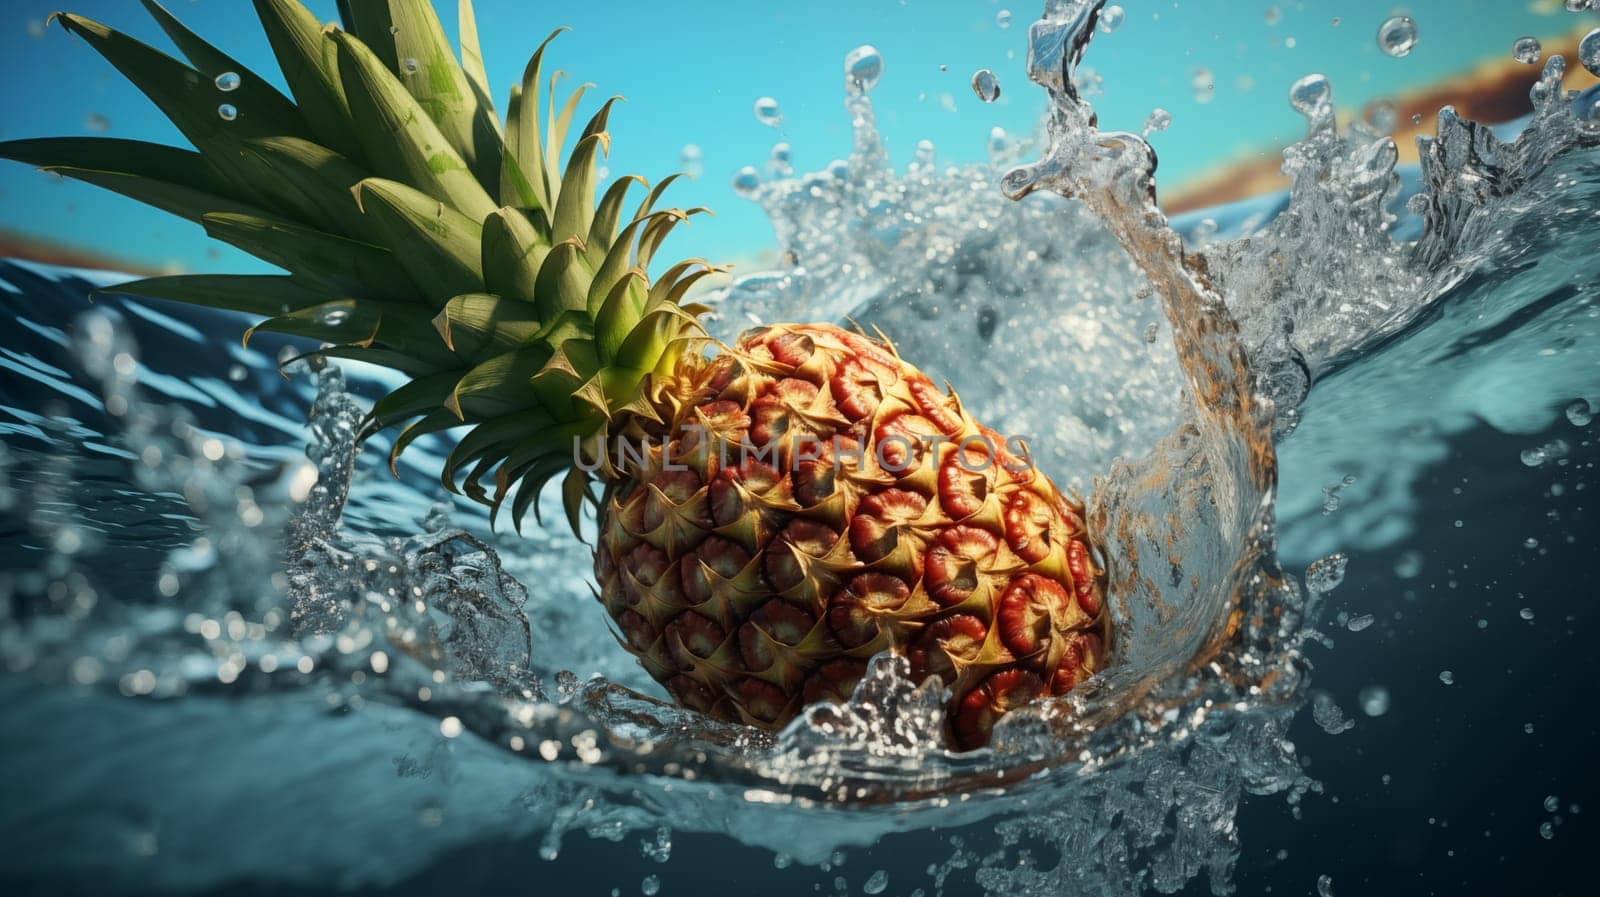 Fresh pineapple falls in blue water, with splashes and air bubbles by Zakharova